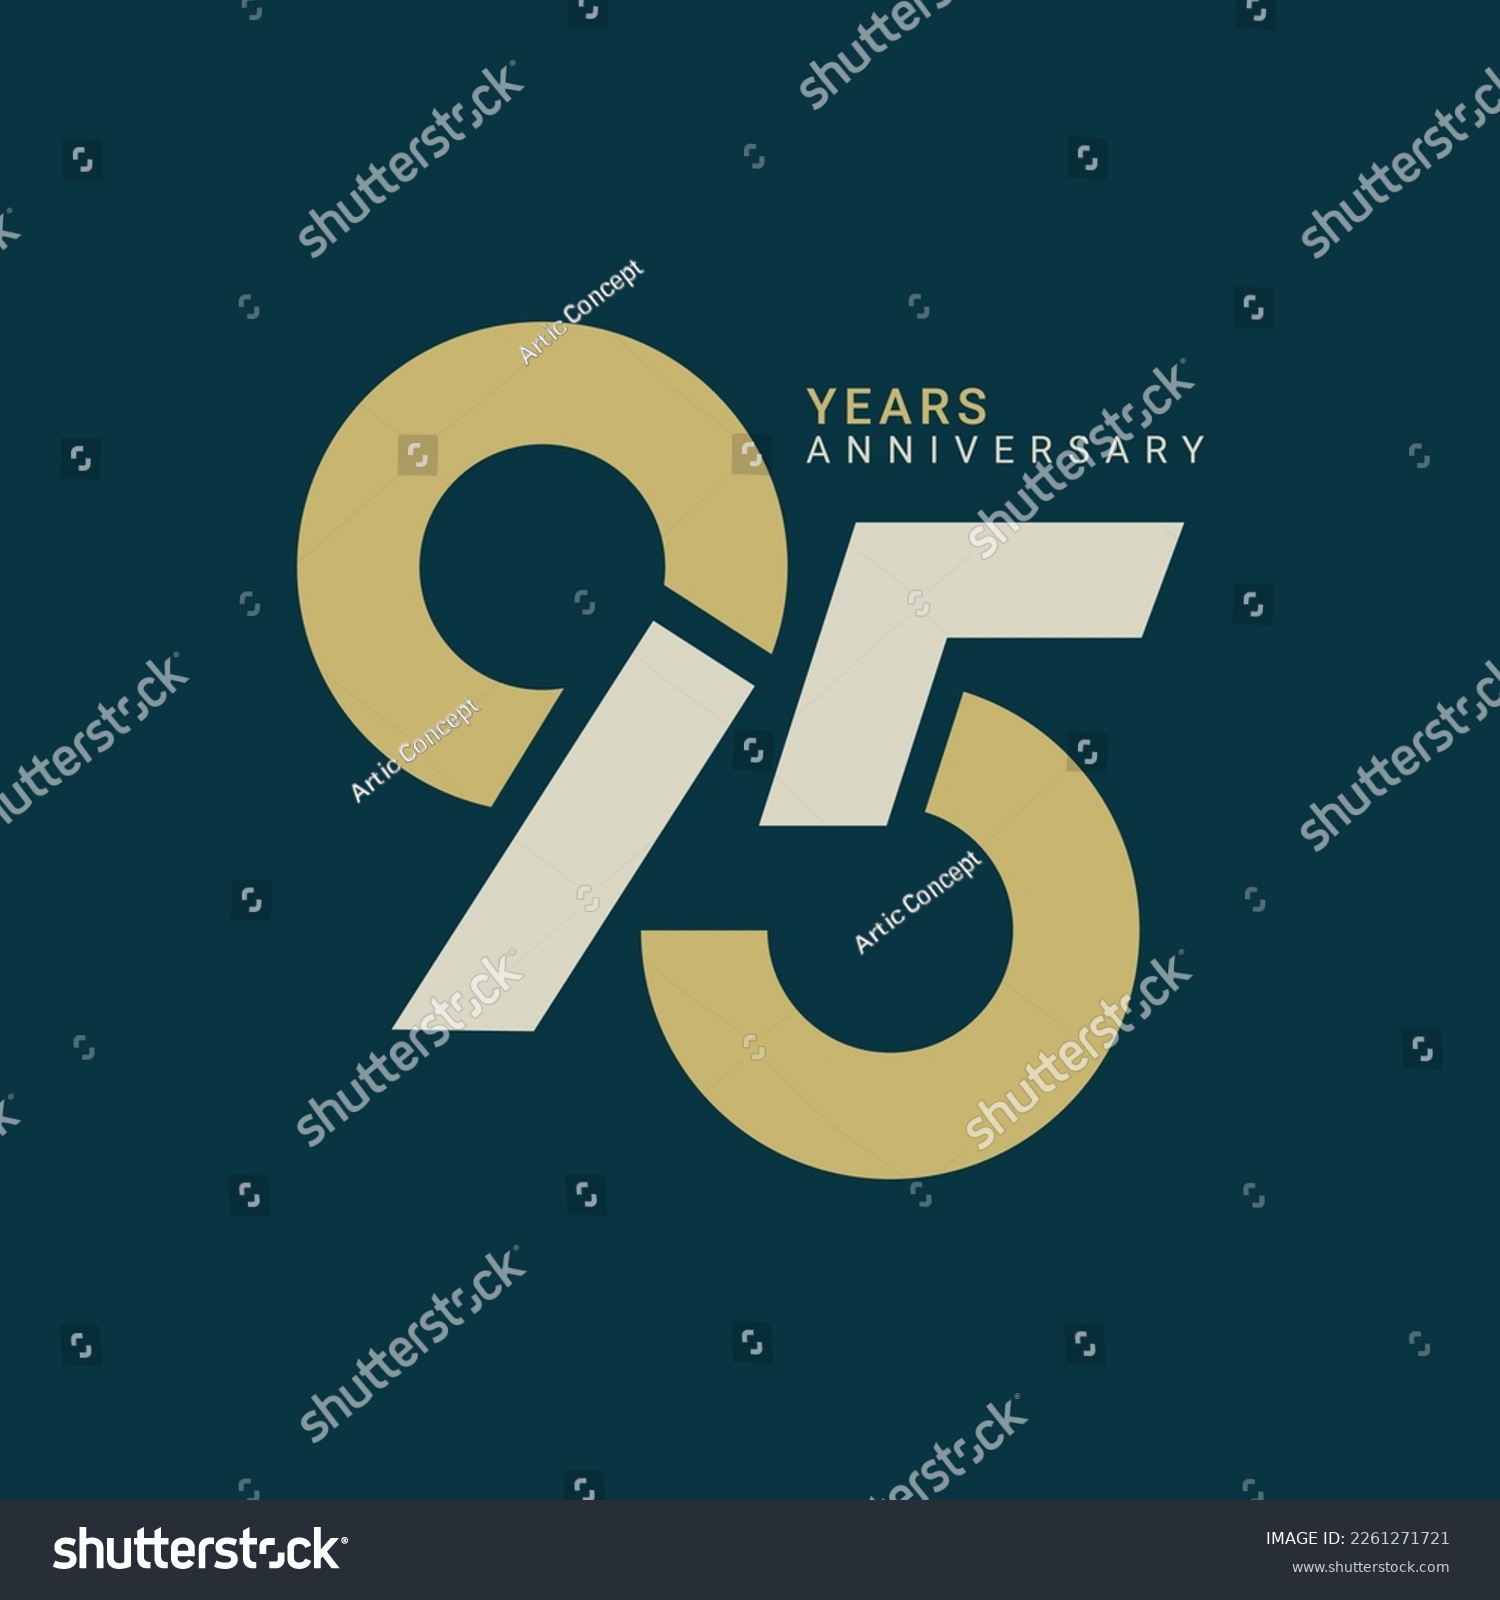 SVG of 95th, 95 Years Anniversary Logo, Golden Color, Vector Template Design element for birthday, invitation, wedding, jubilee and greeting card illustration. svg